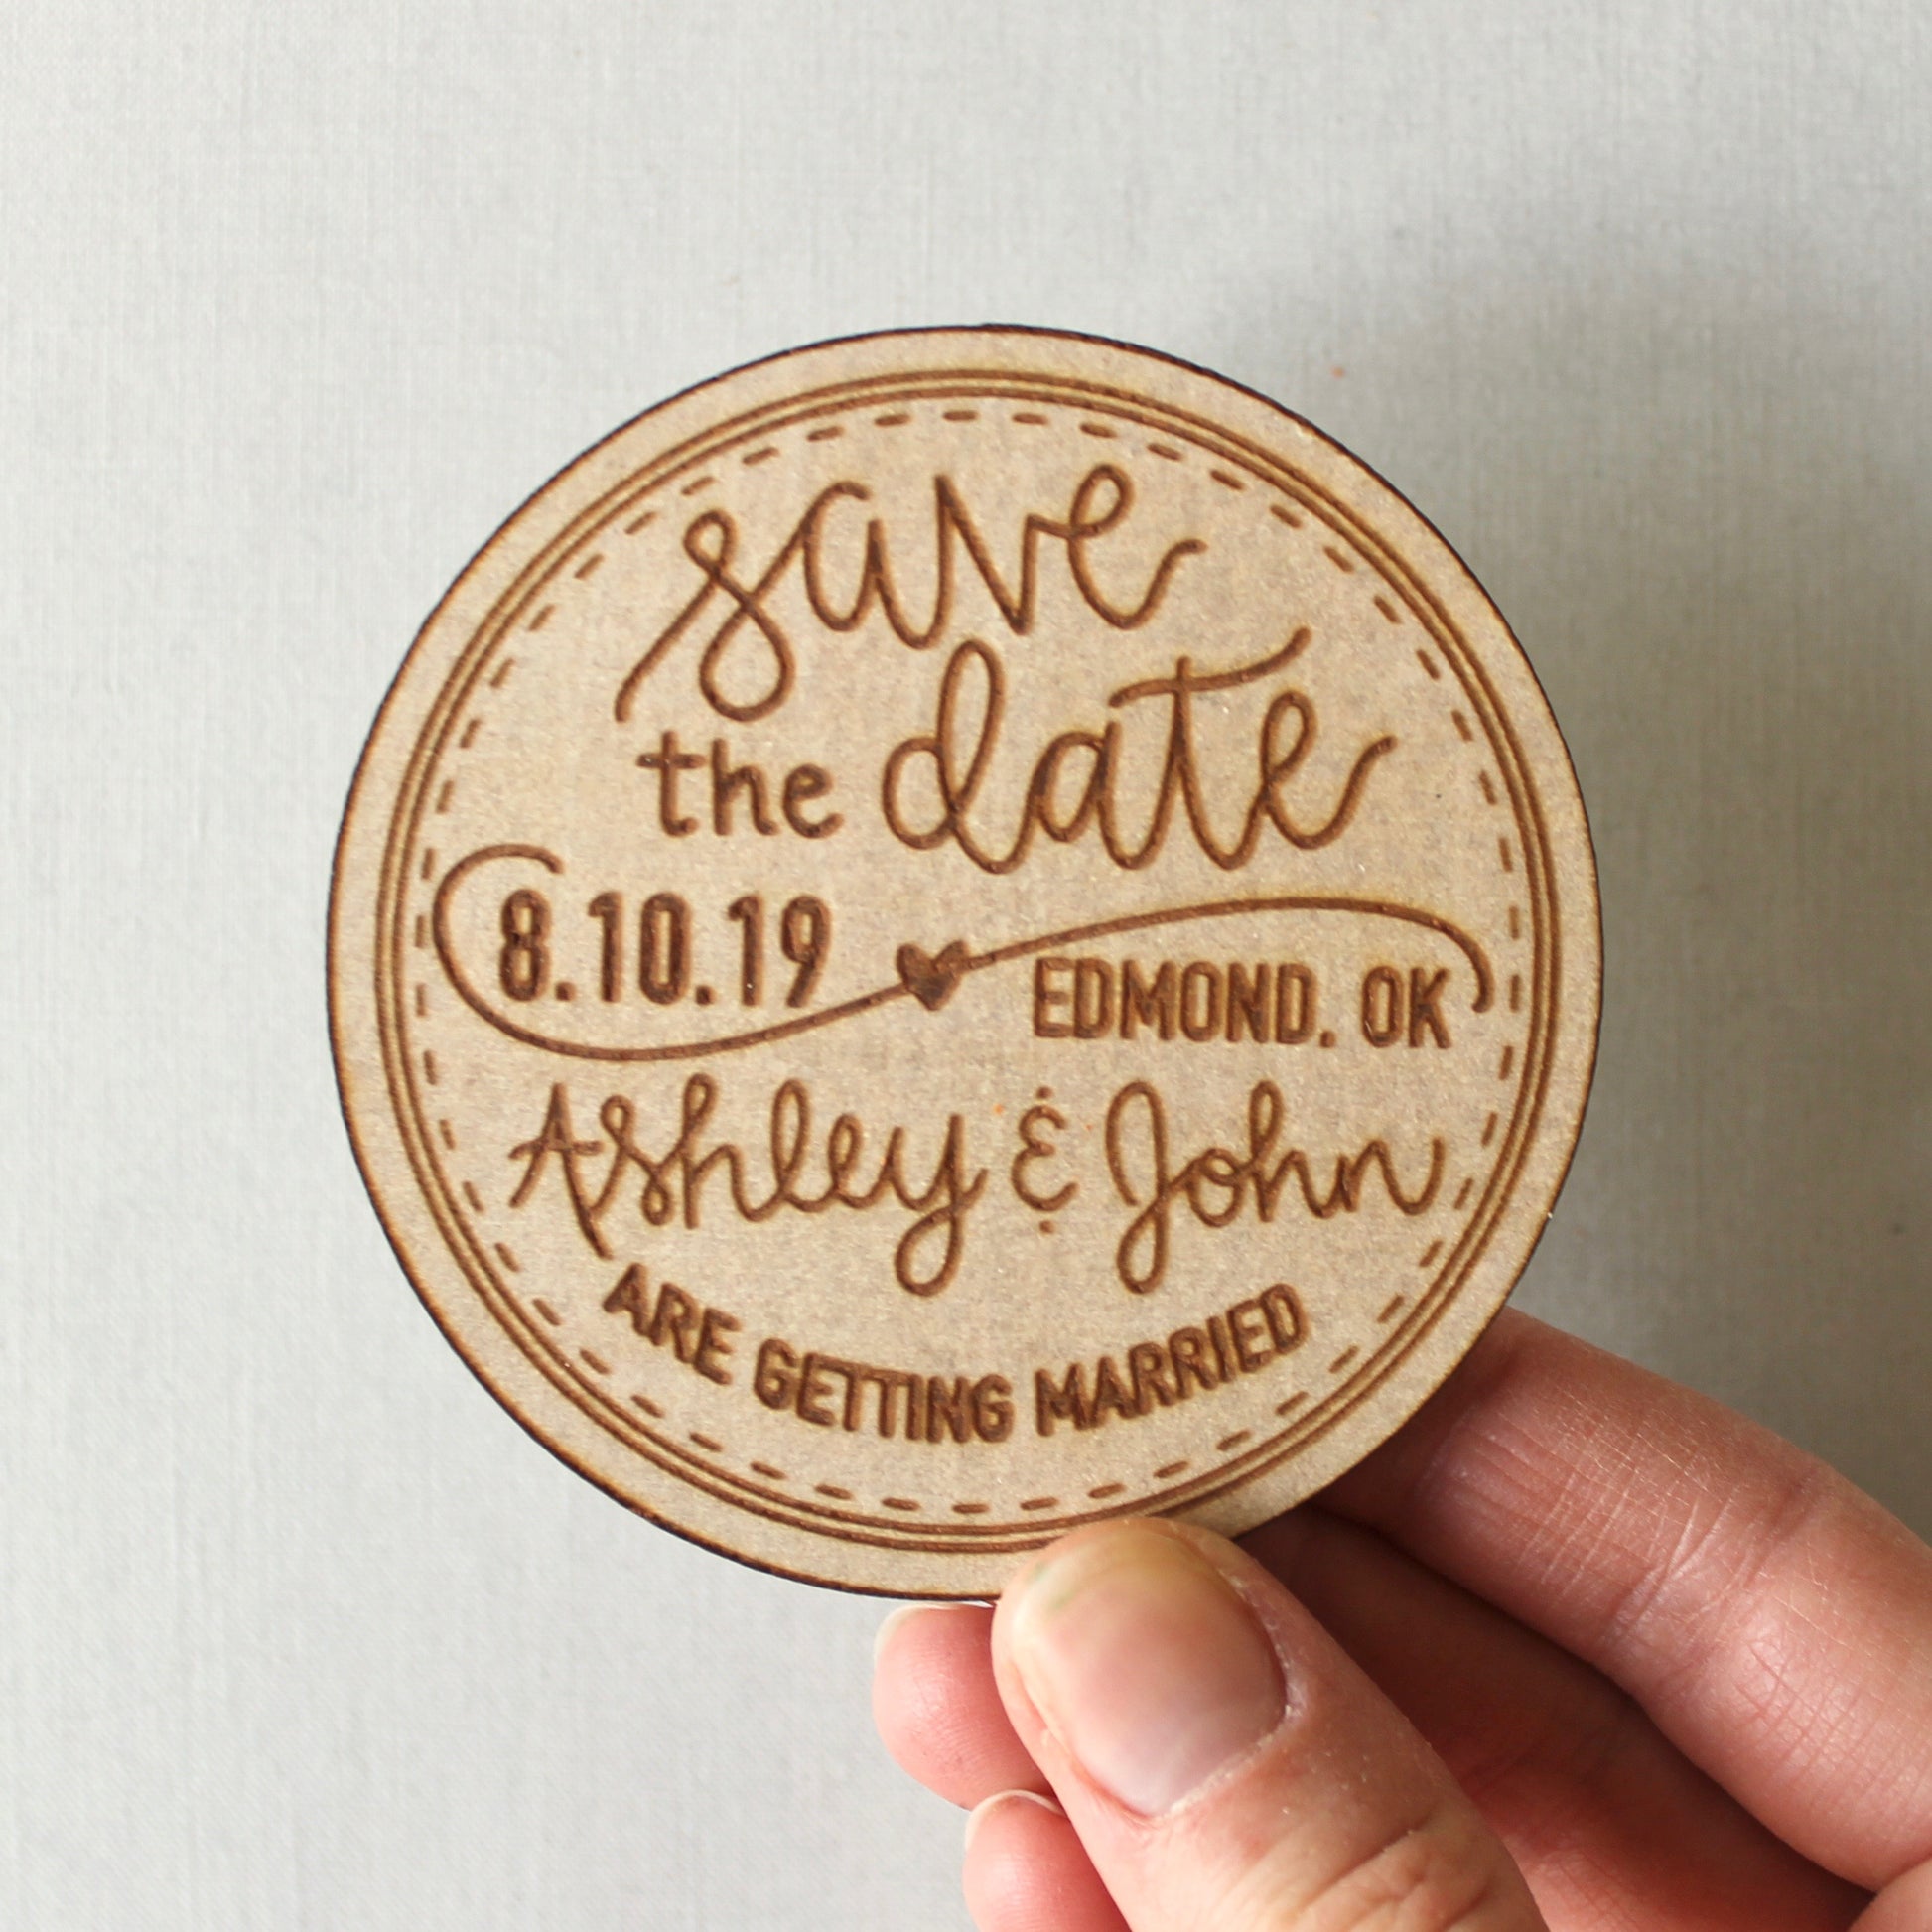 Save the dates, wooden save the date magnets, heart save the dates, rustic  save the dates, wedding save the dates, wedding magnets, 25 pc